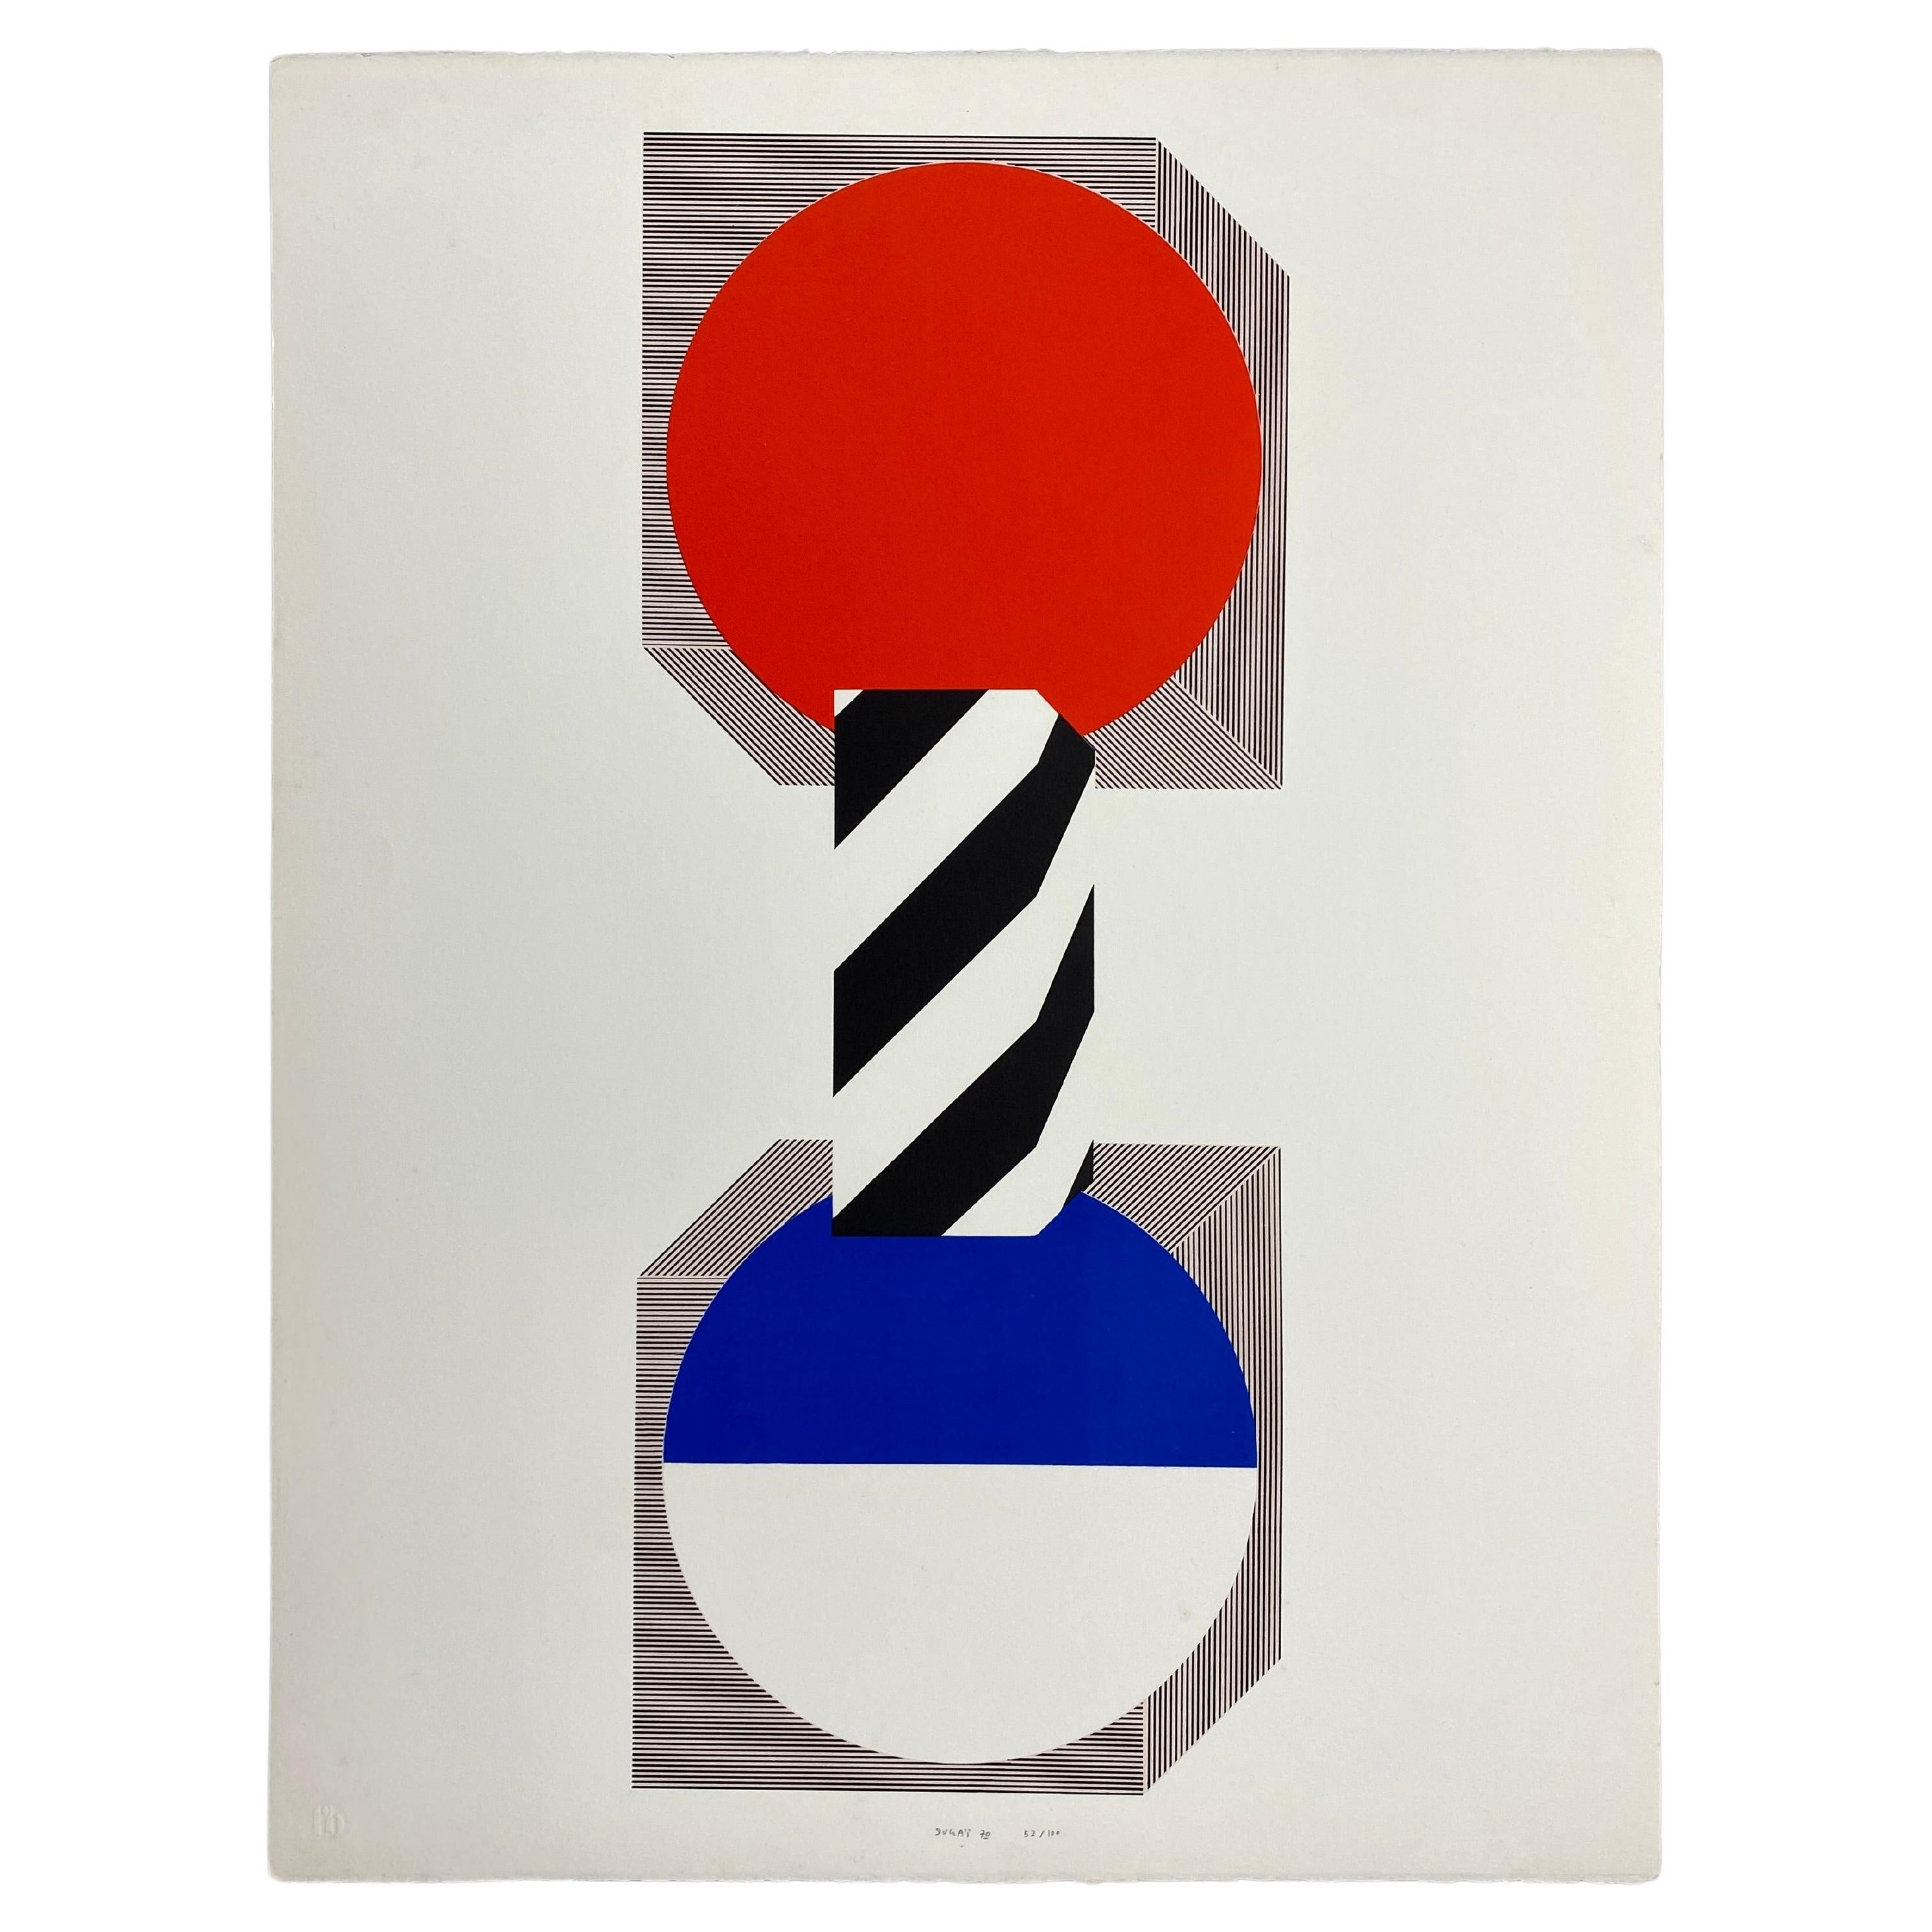 Limited Edition 1970 Lithograph by Kumi Sugai For Sale